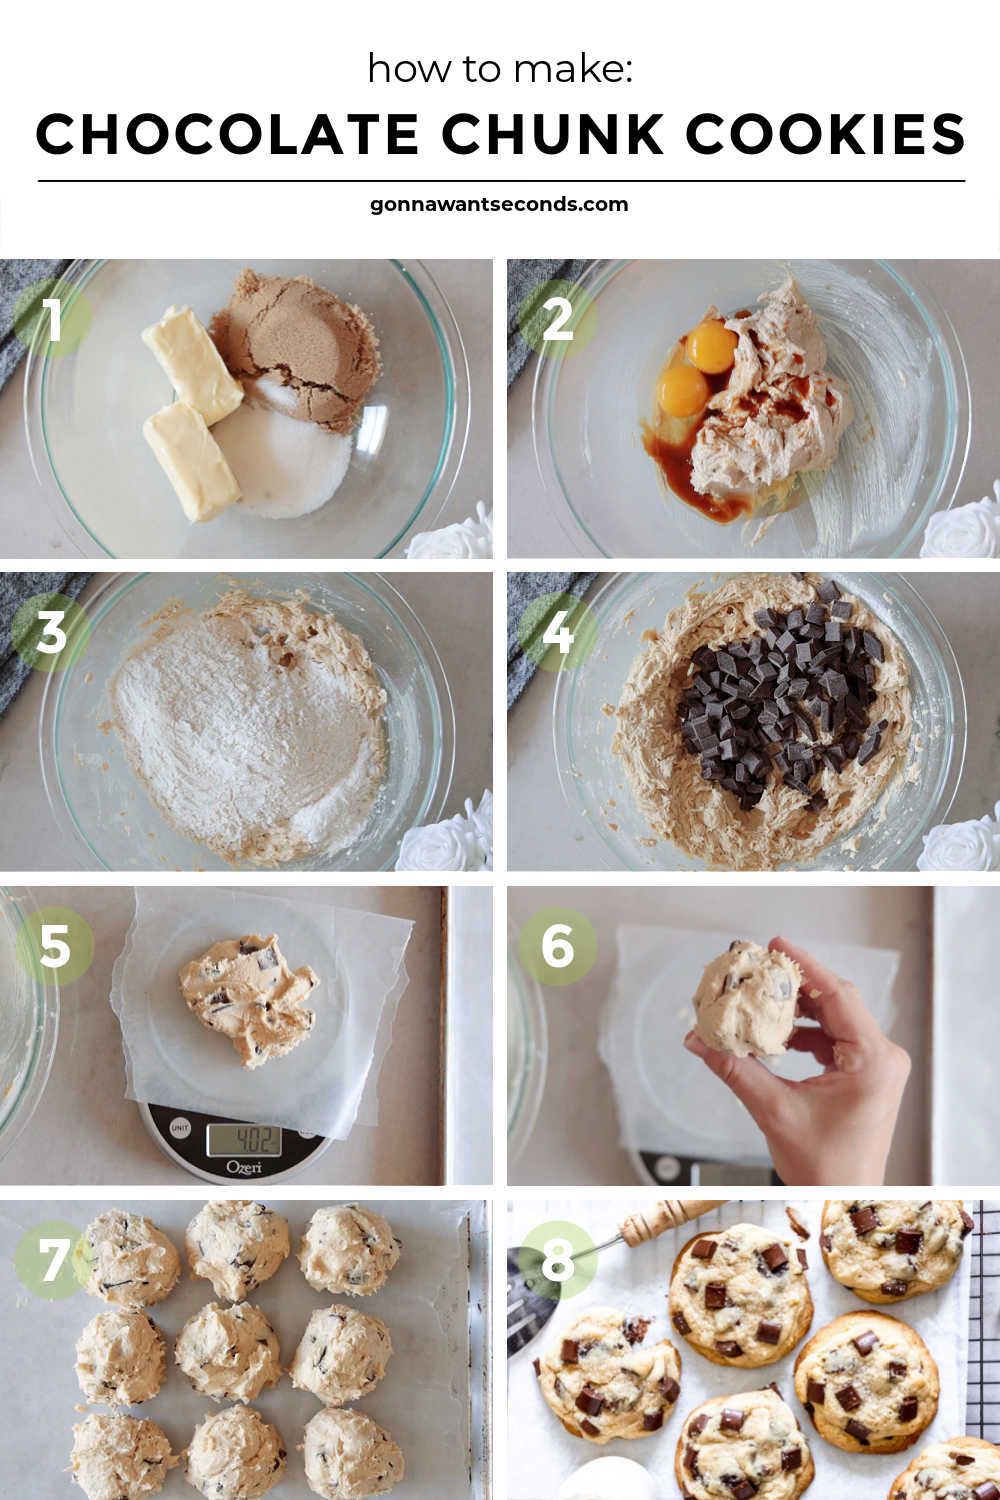 step by step how to make chocolate chunk cookies